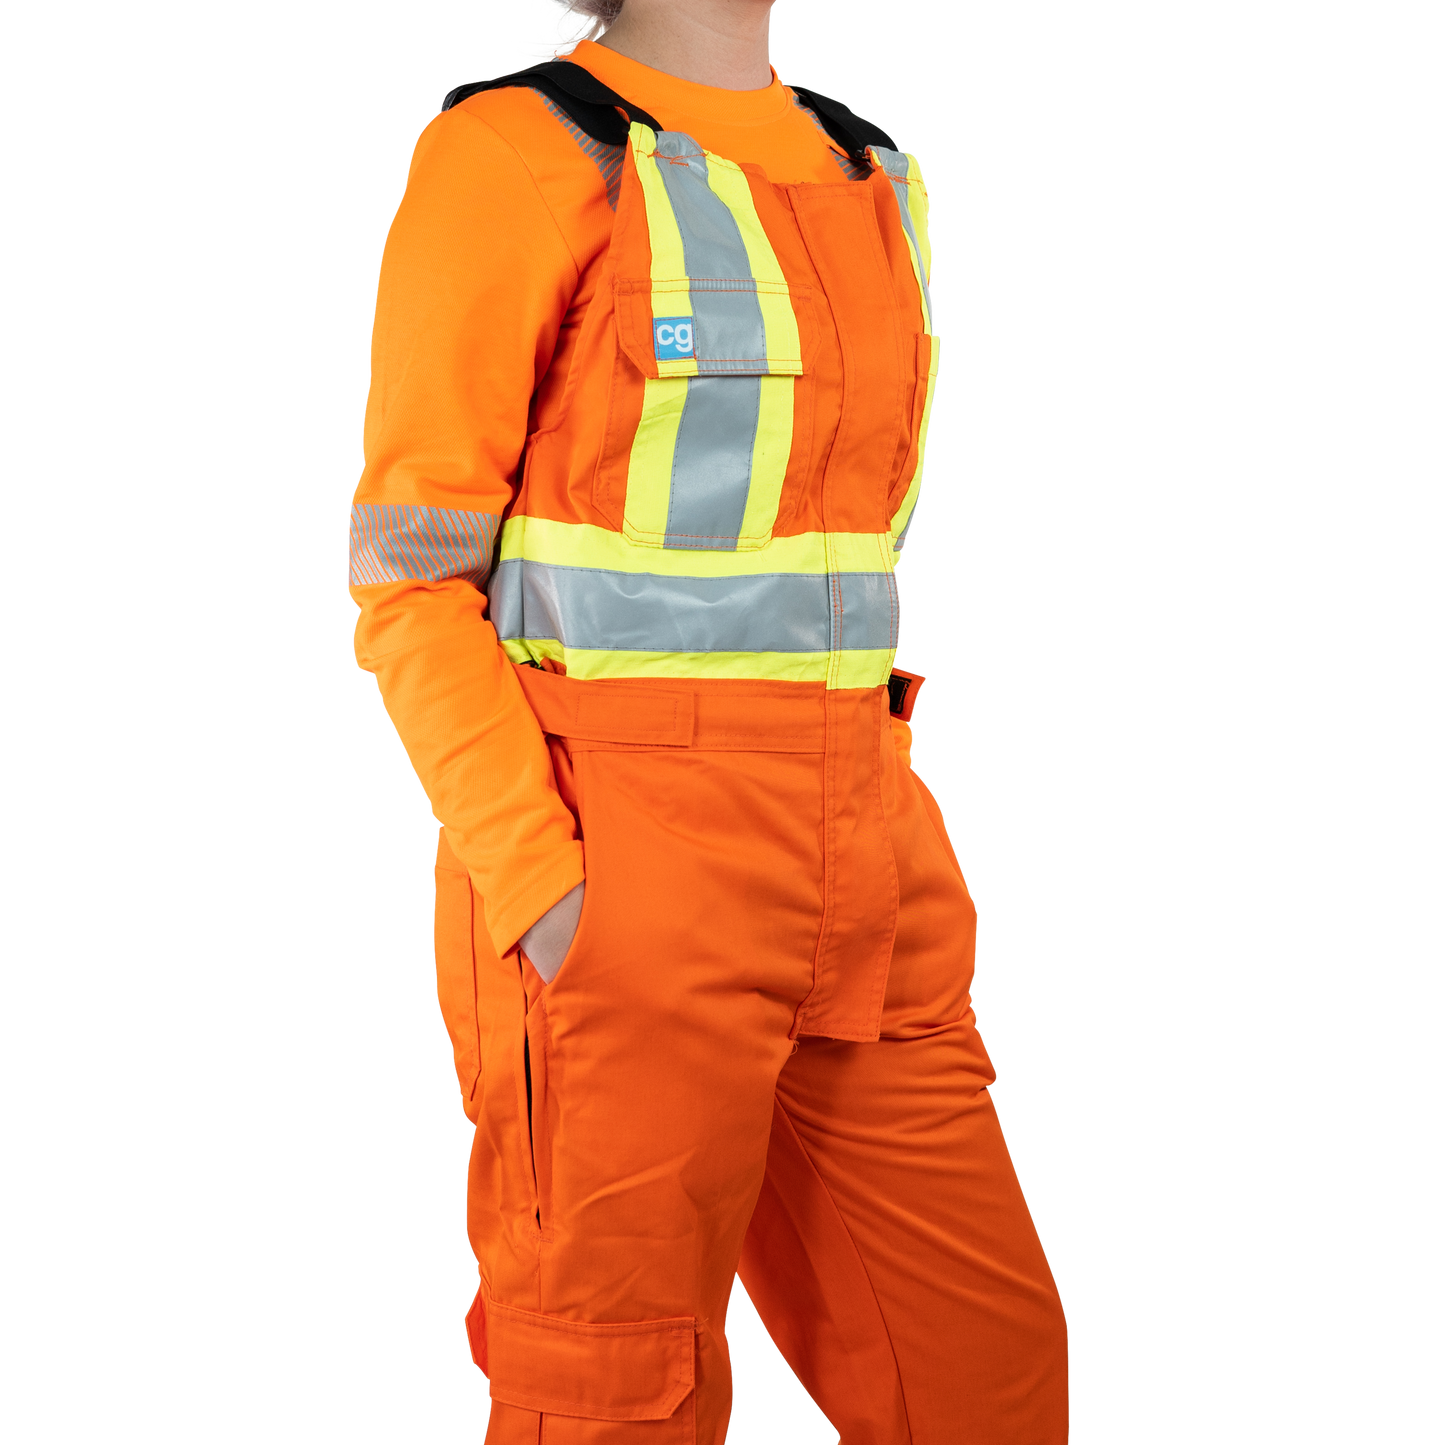 Bib Covergall 4" Triple Stripe - available in Safety Orange or Navy